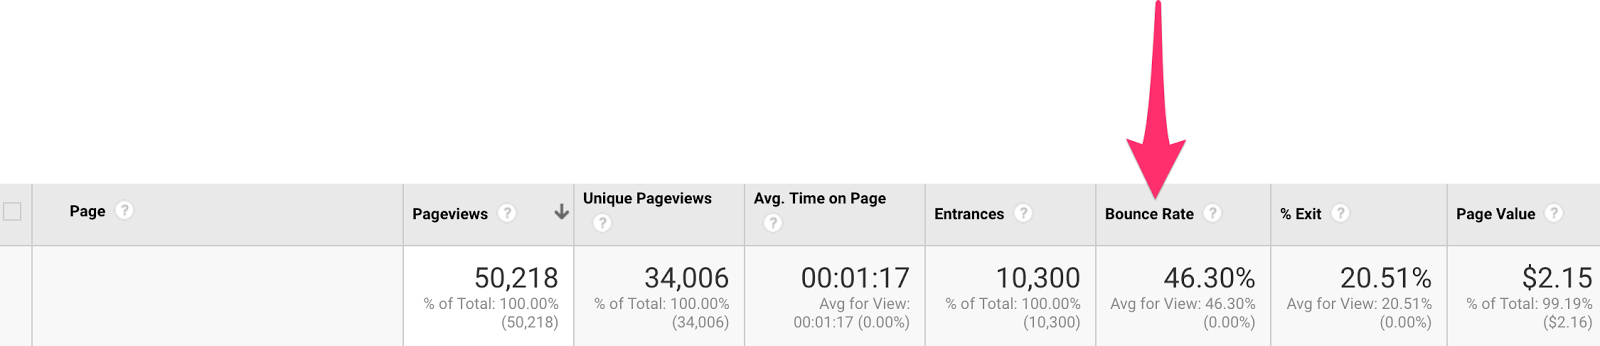 Pages Analytics 2